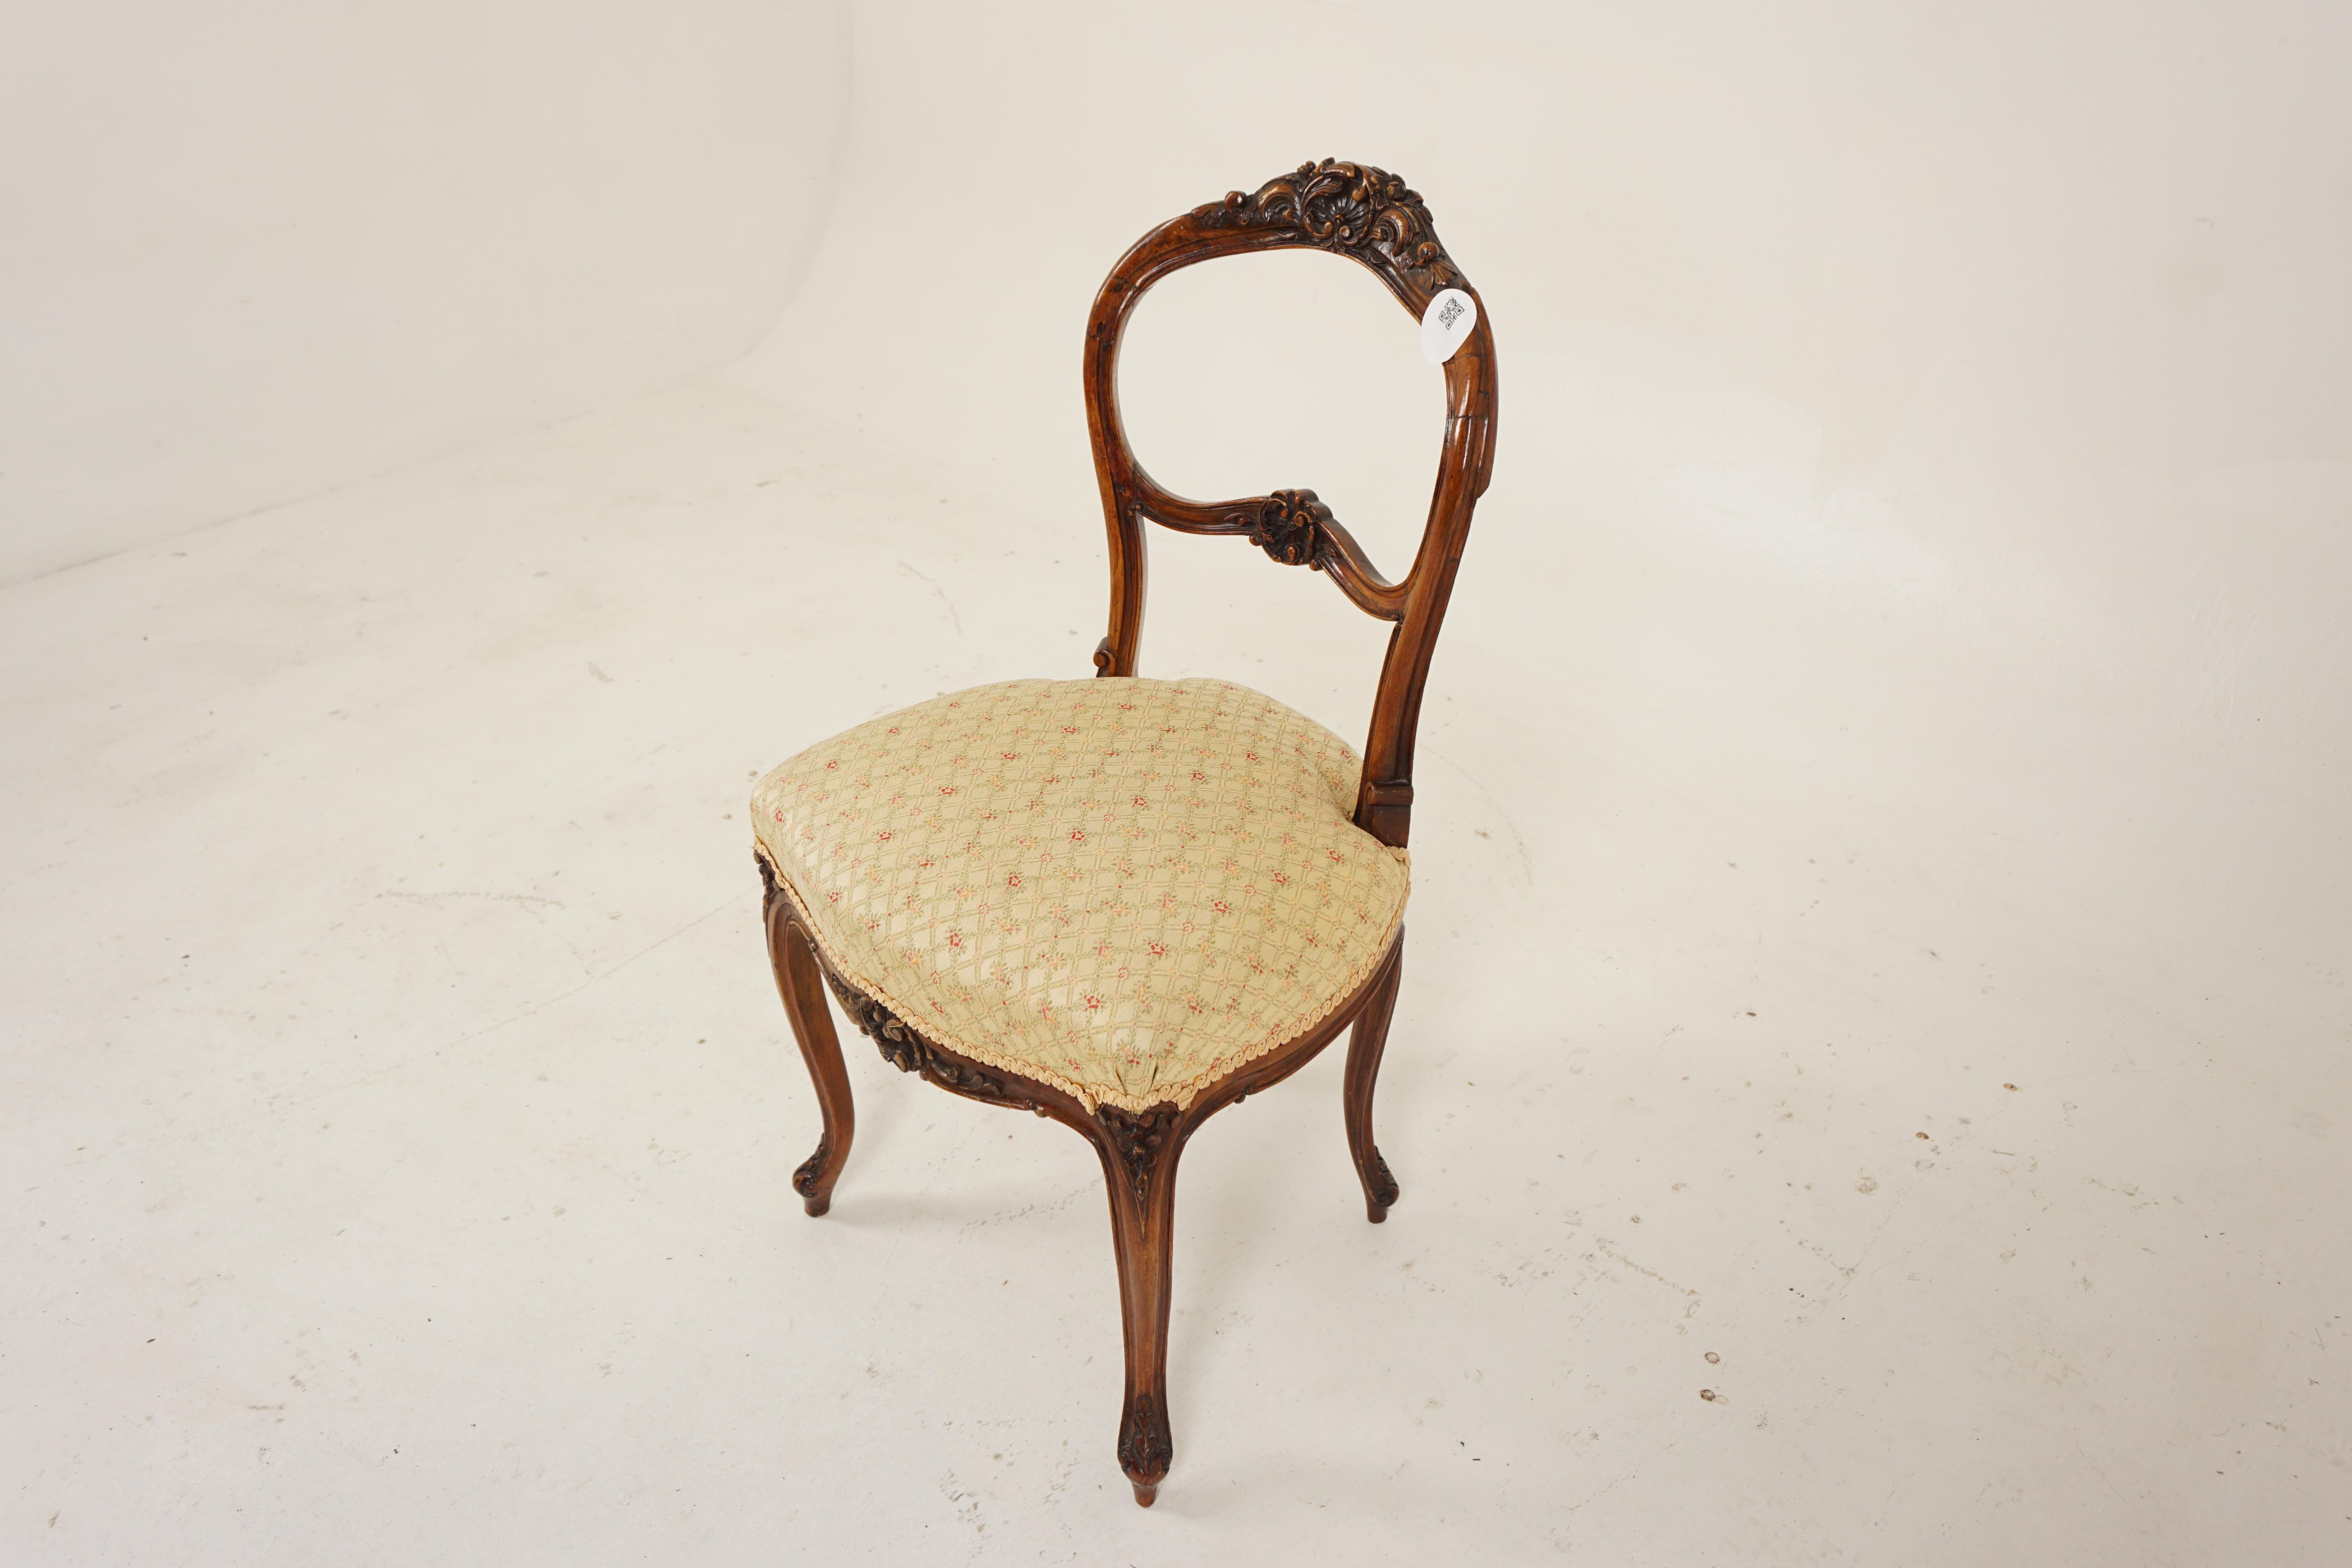 Antique Victorian Carved Walnut upholstered needlepoint occasional chair, Scotland 1870, H693

Scotland 1870
Solid Walnut
Original Finish
Carved shaped back
Upholstered needlepoint seat
Standing on cabriole legs
Nice quality and in good solid